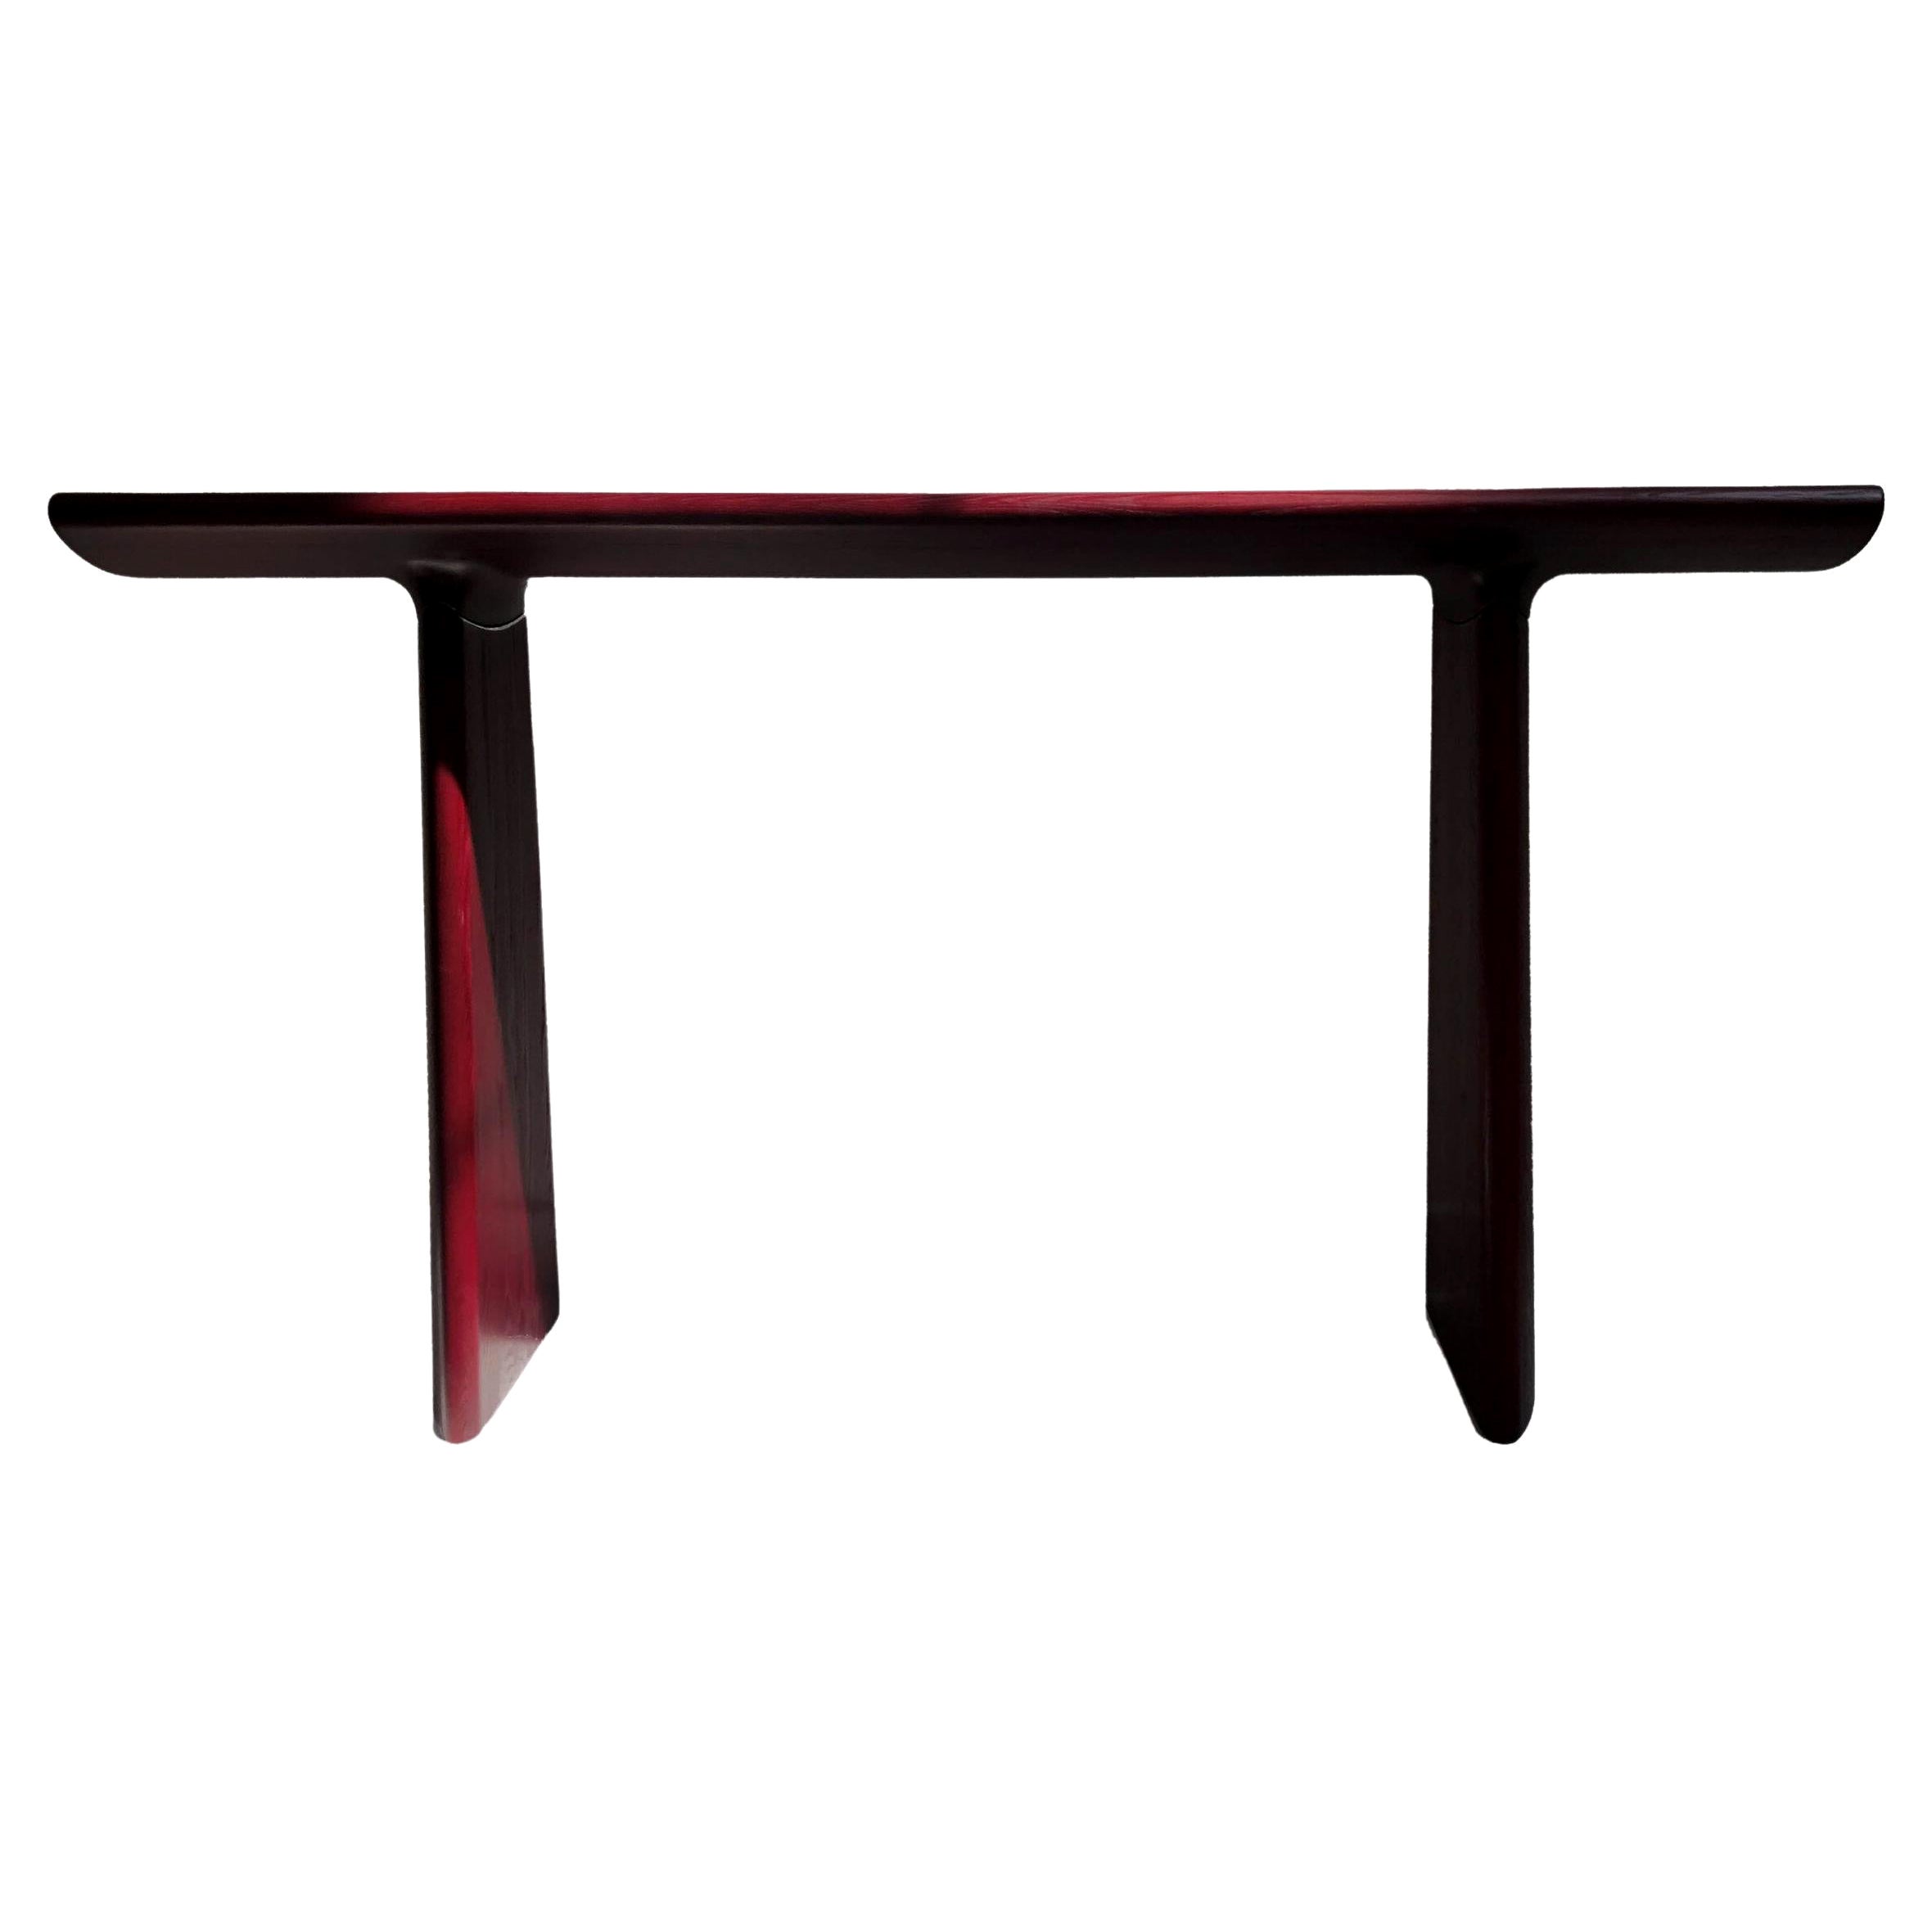 Burgundy Stained Ash Daiku Console 160 by Victoria Magniant For Sale